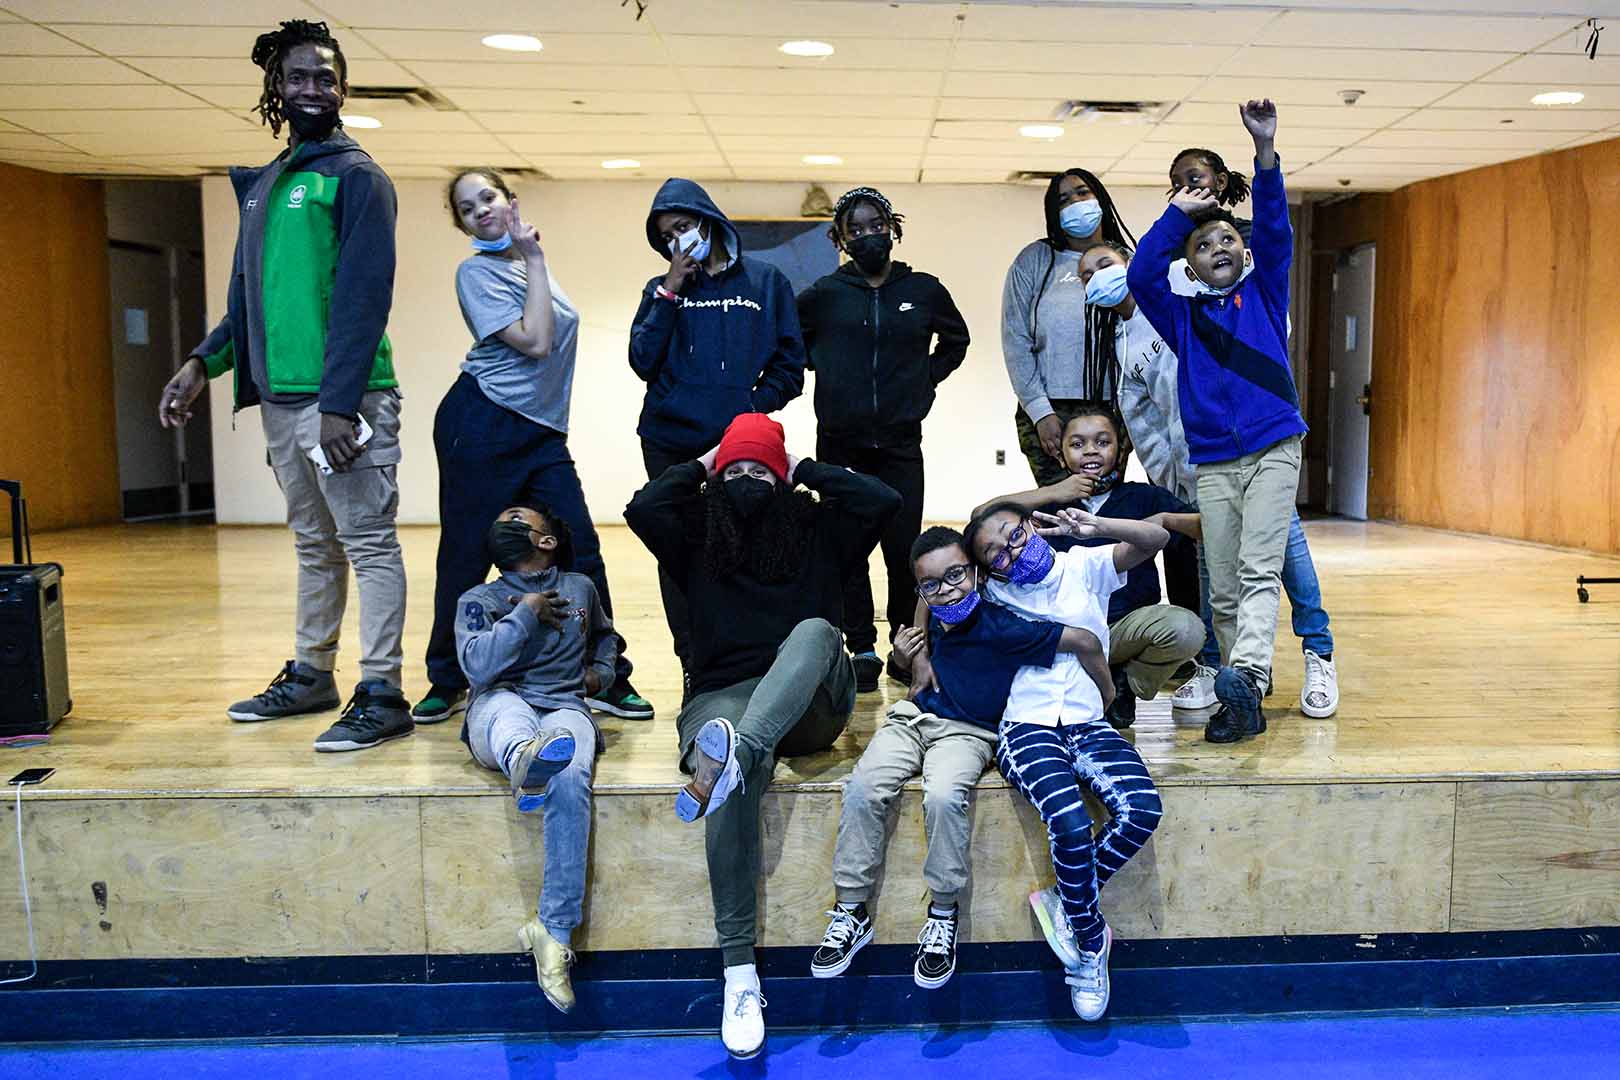 Tap Dance Kidz at Hunts Point Recreation Center in the Bronx